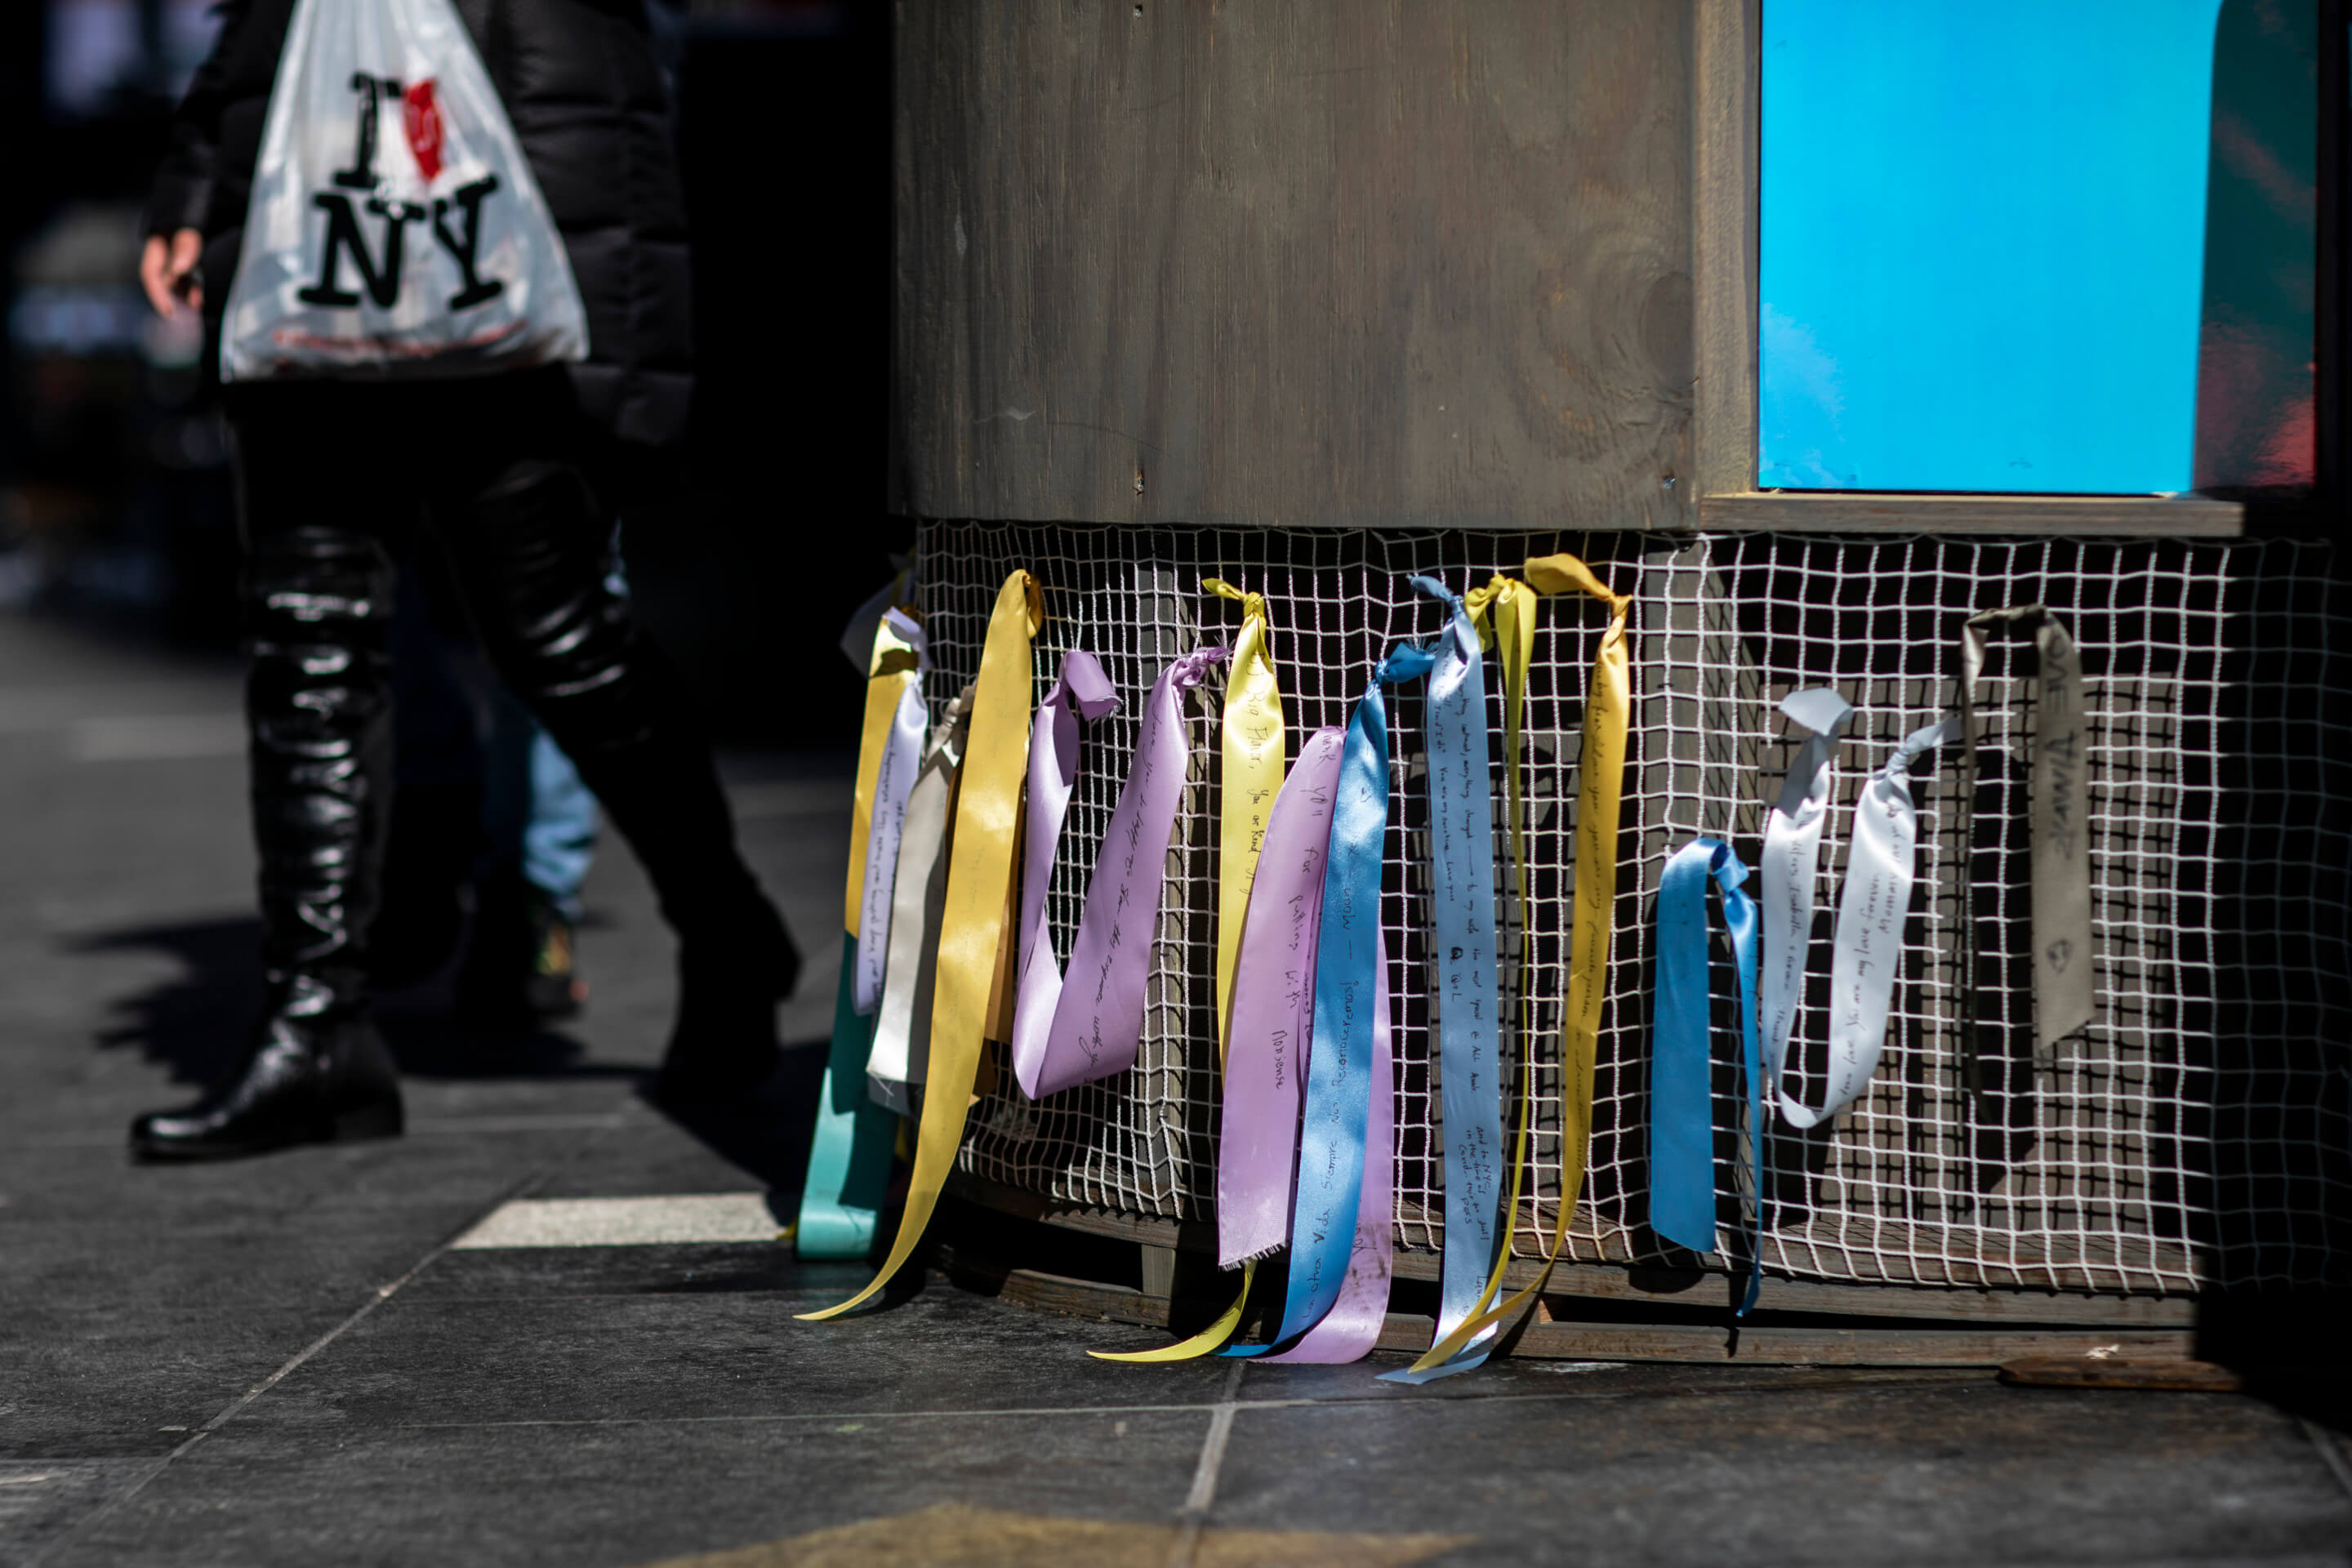 ribbons adorning a public art installation in times square